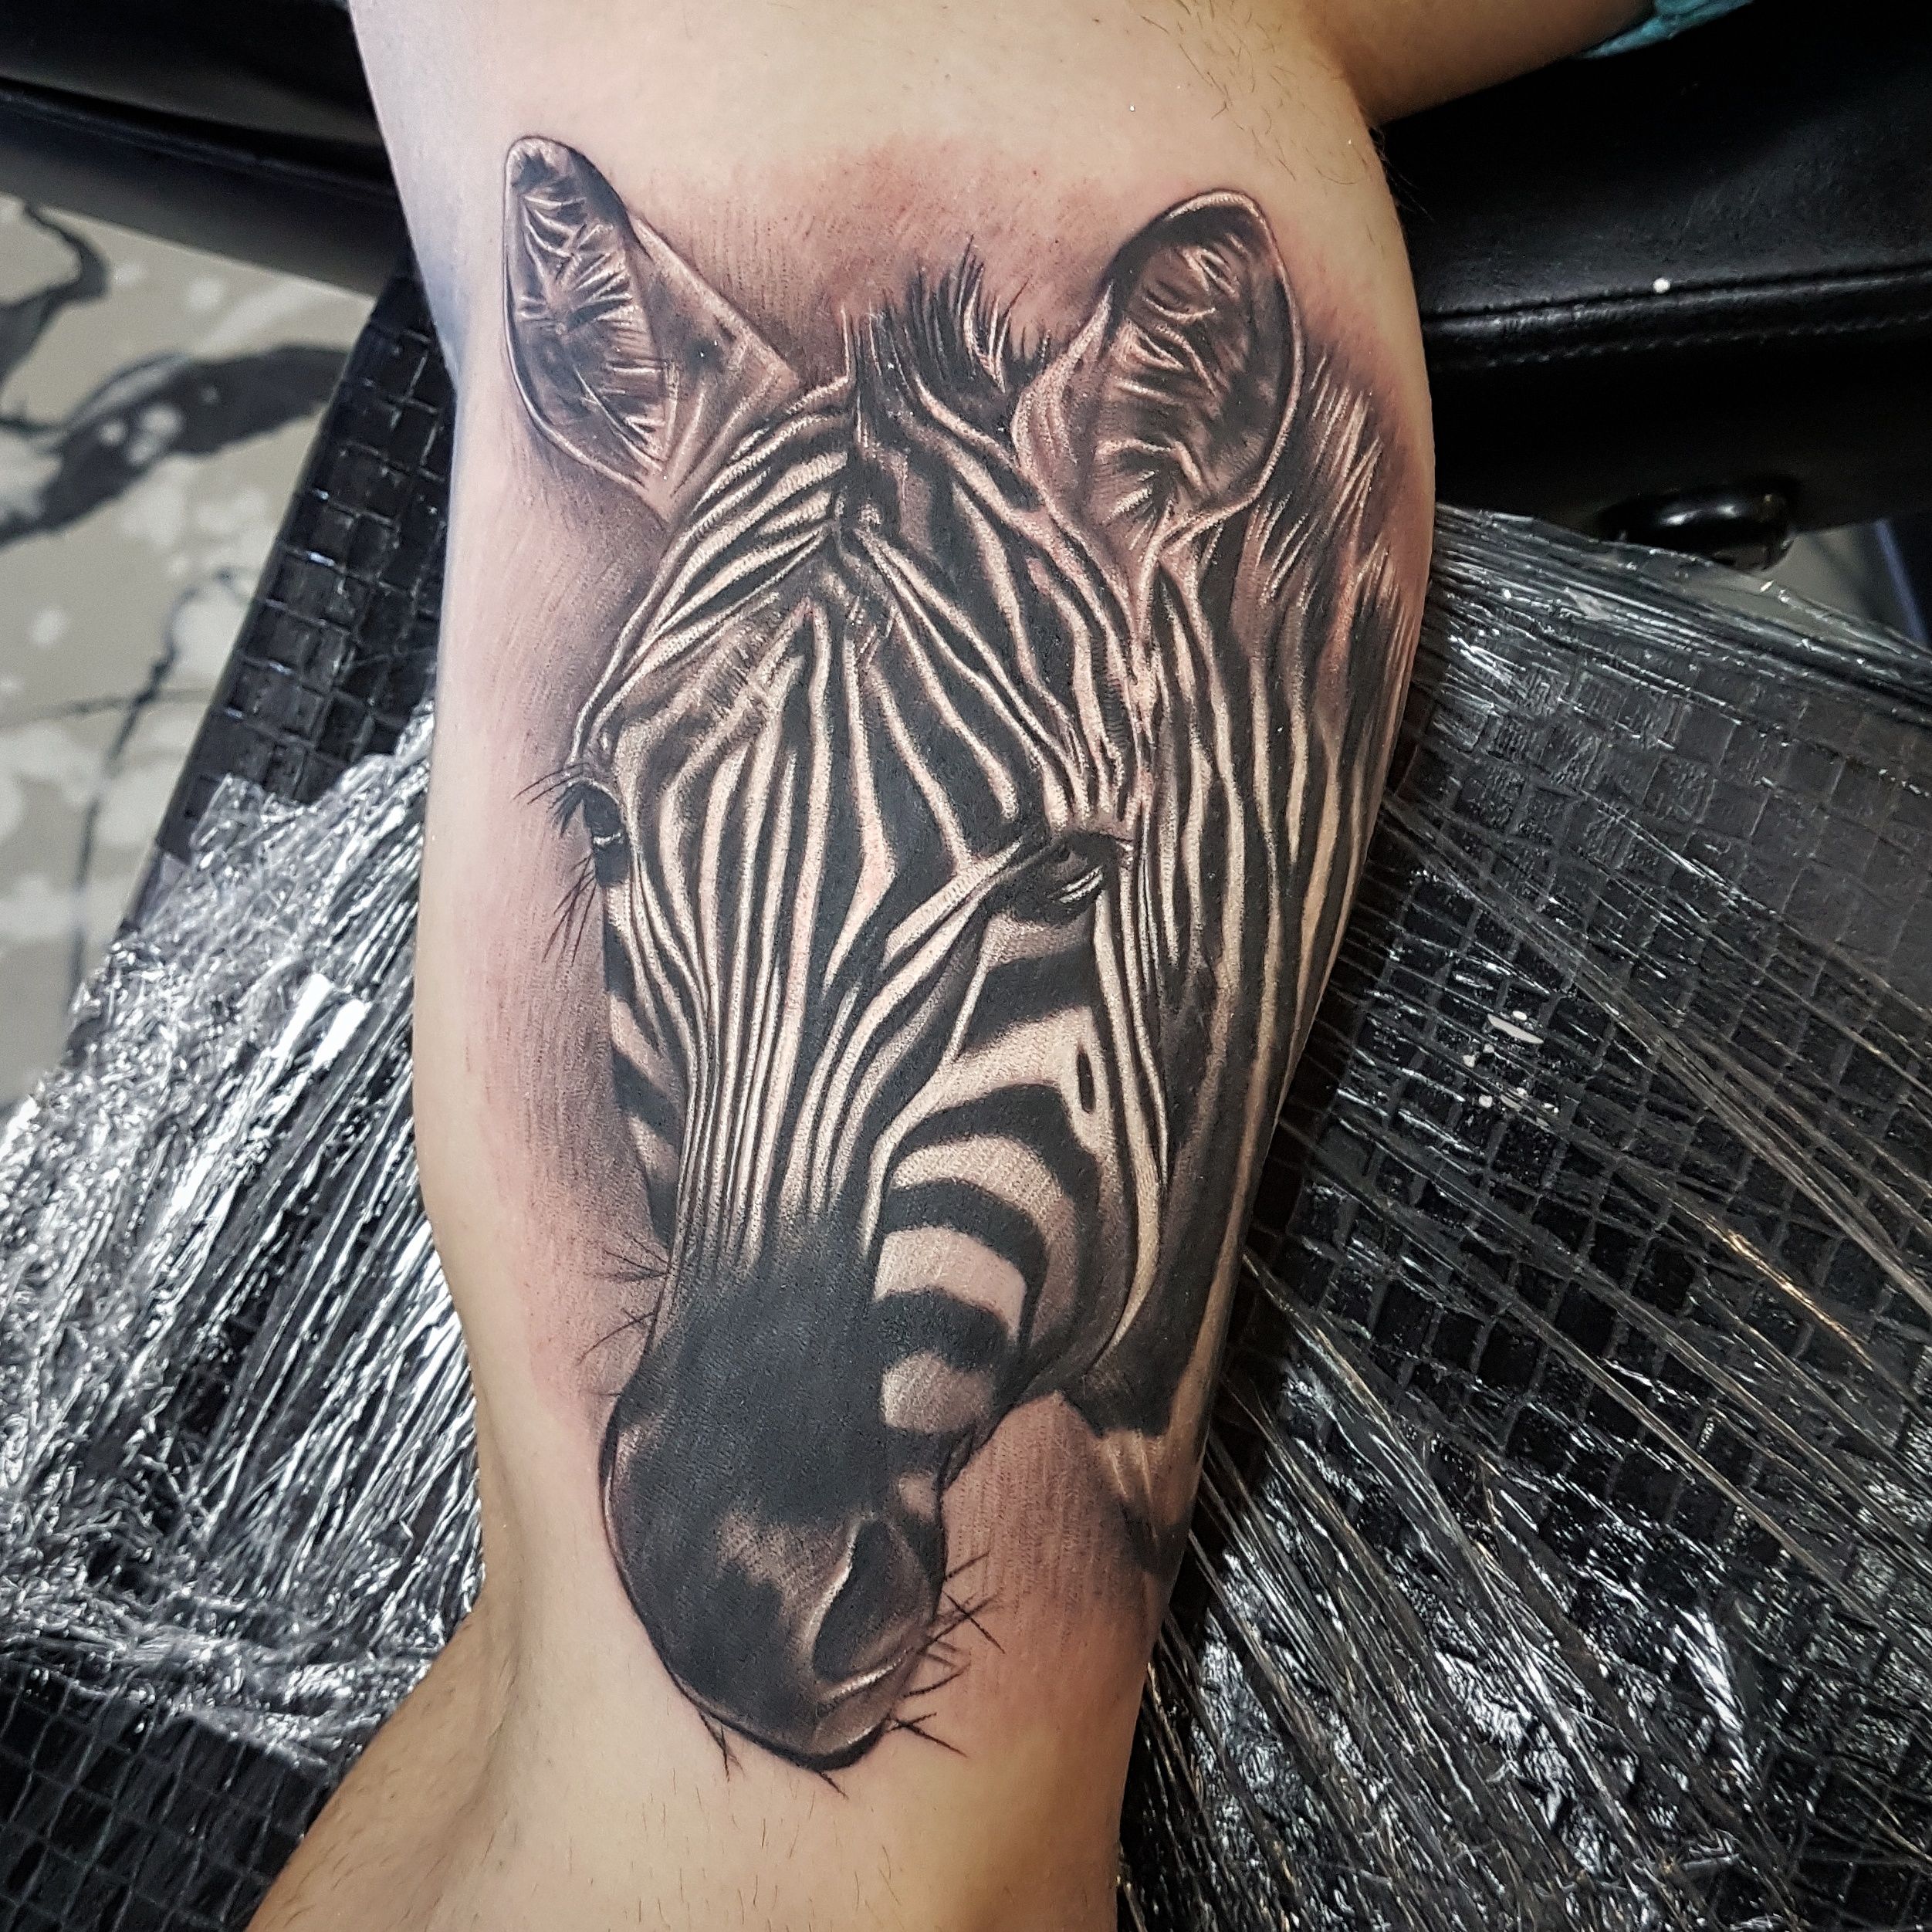 Popular Zebra Tattoo Designs and Meanings